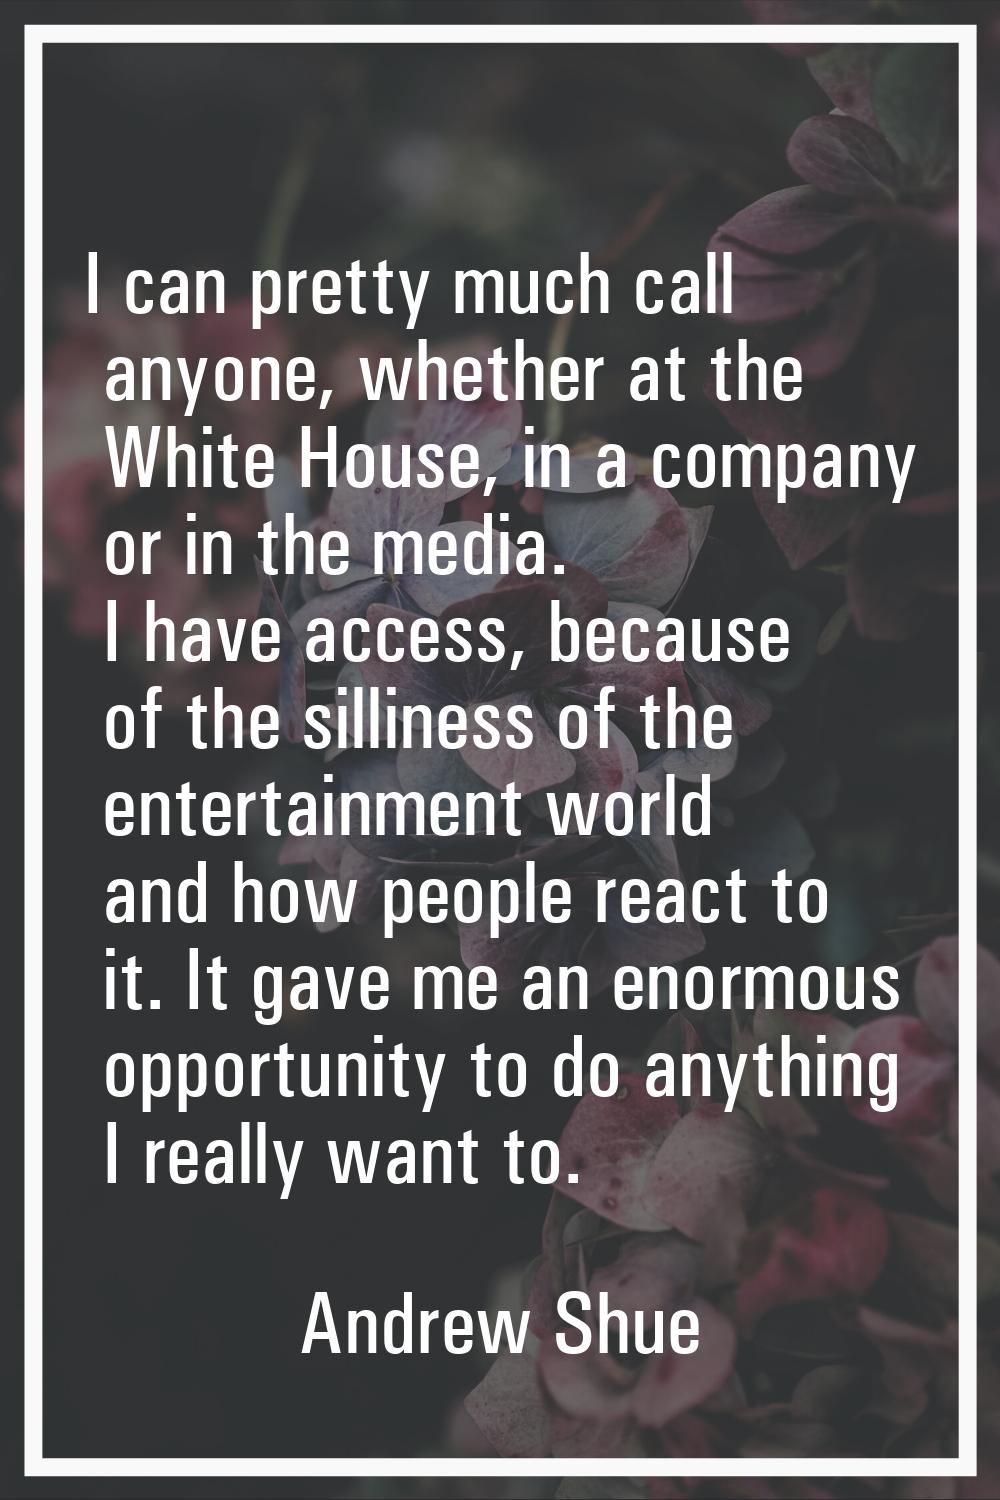 I can pretty much call anyone, whether at the White House, in a company or in the media. I have acc